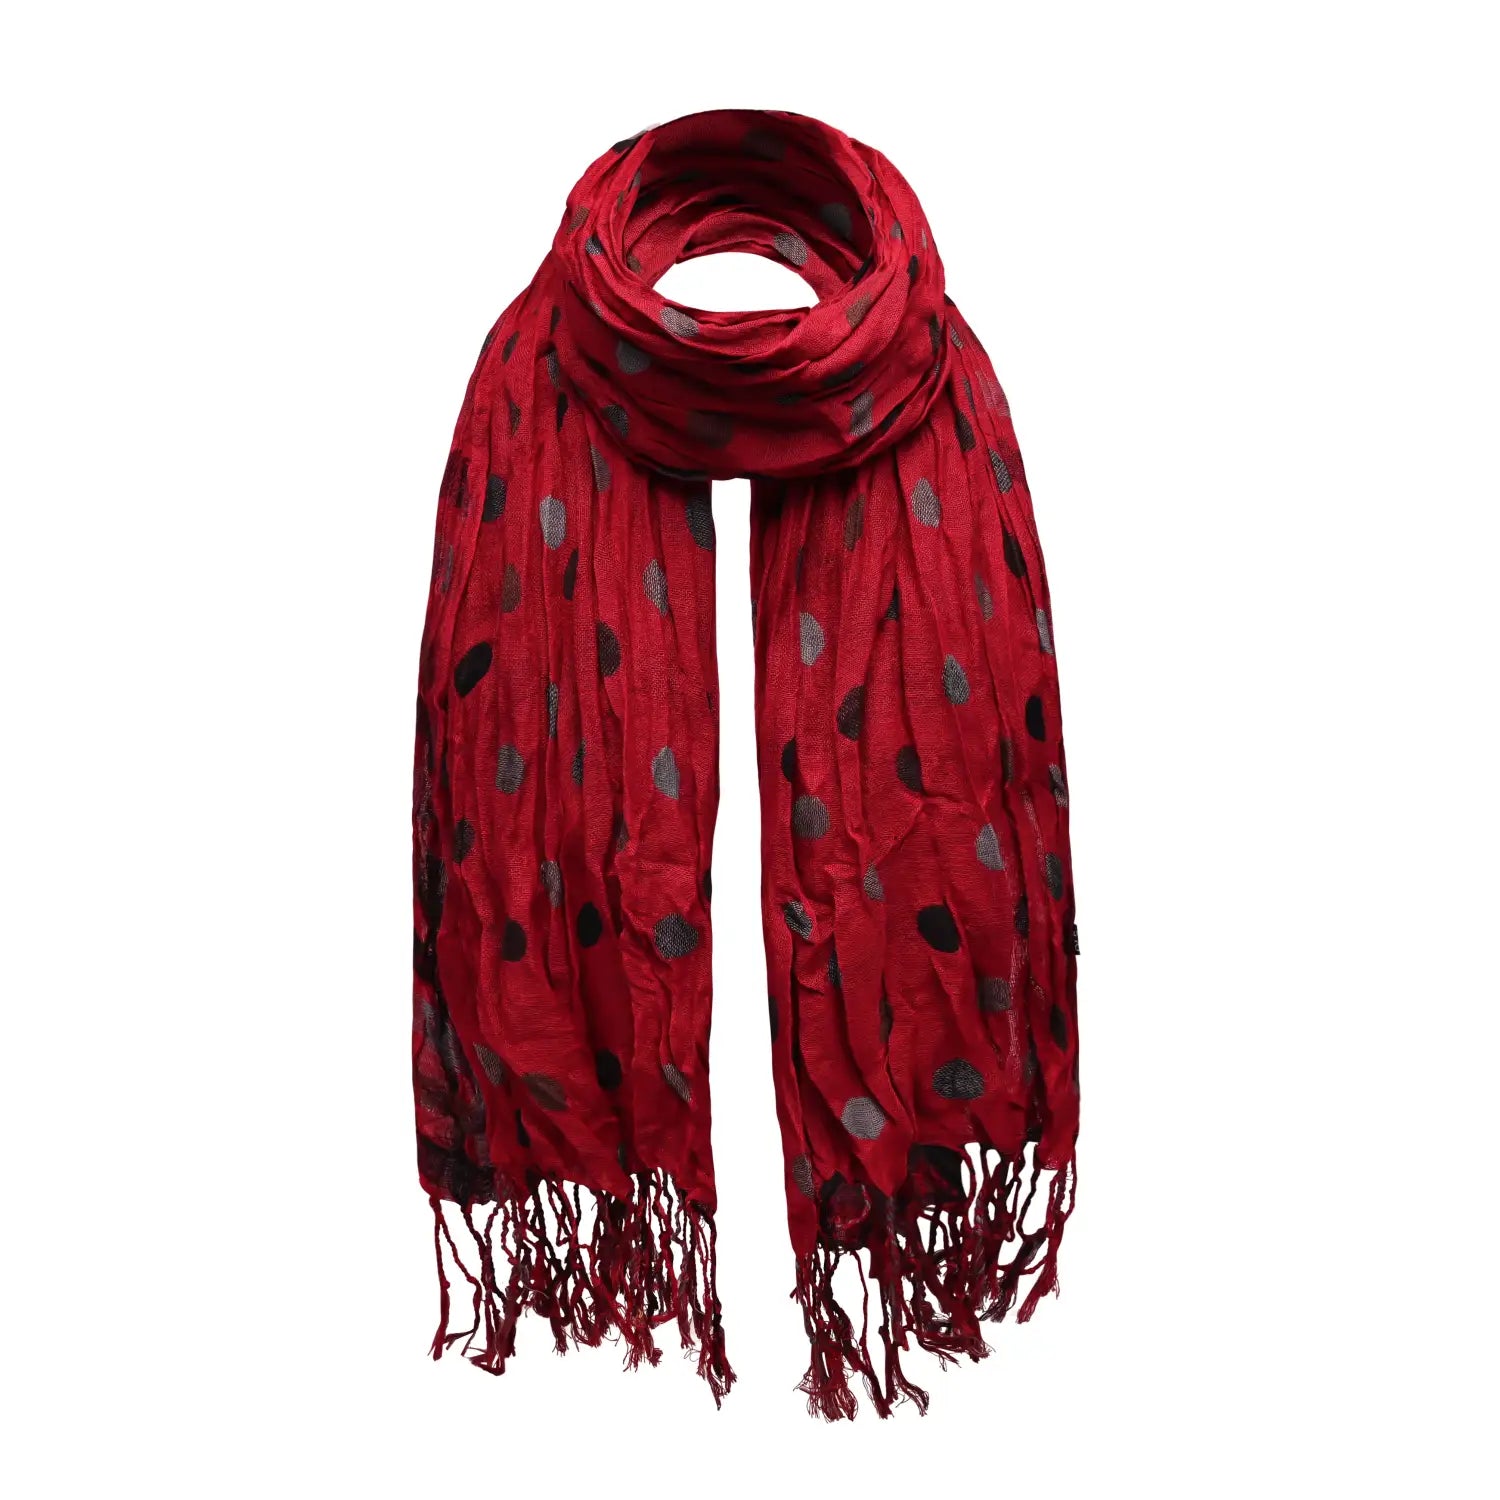 Red scarf with black and grey polka dot hearts.